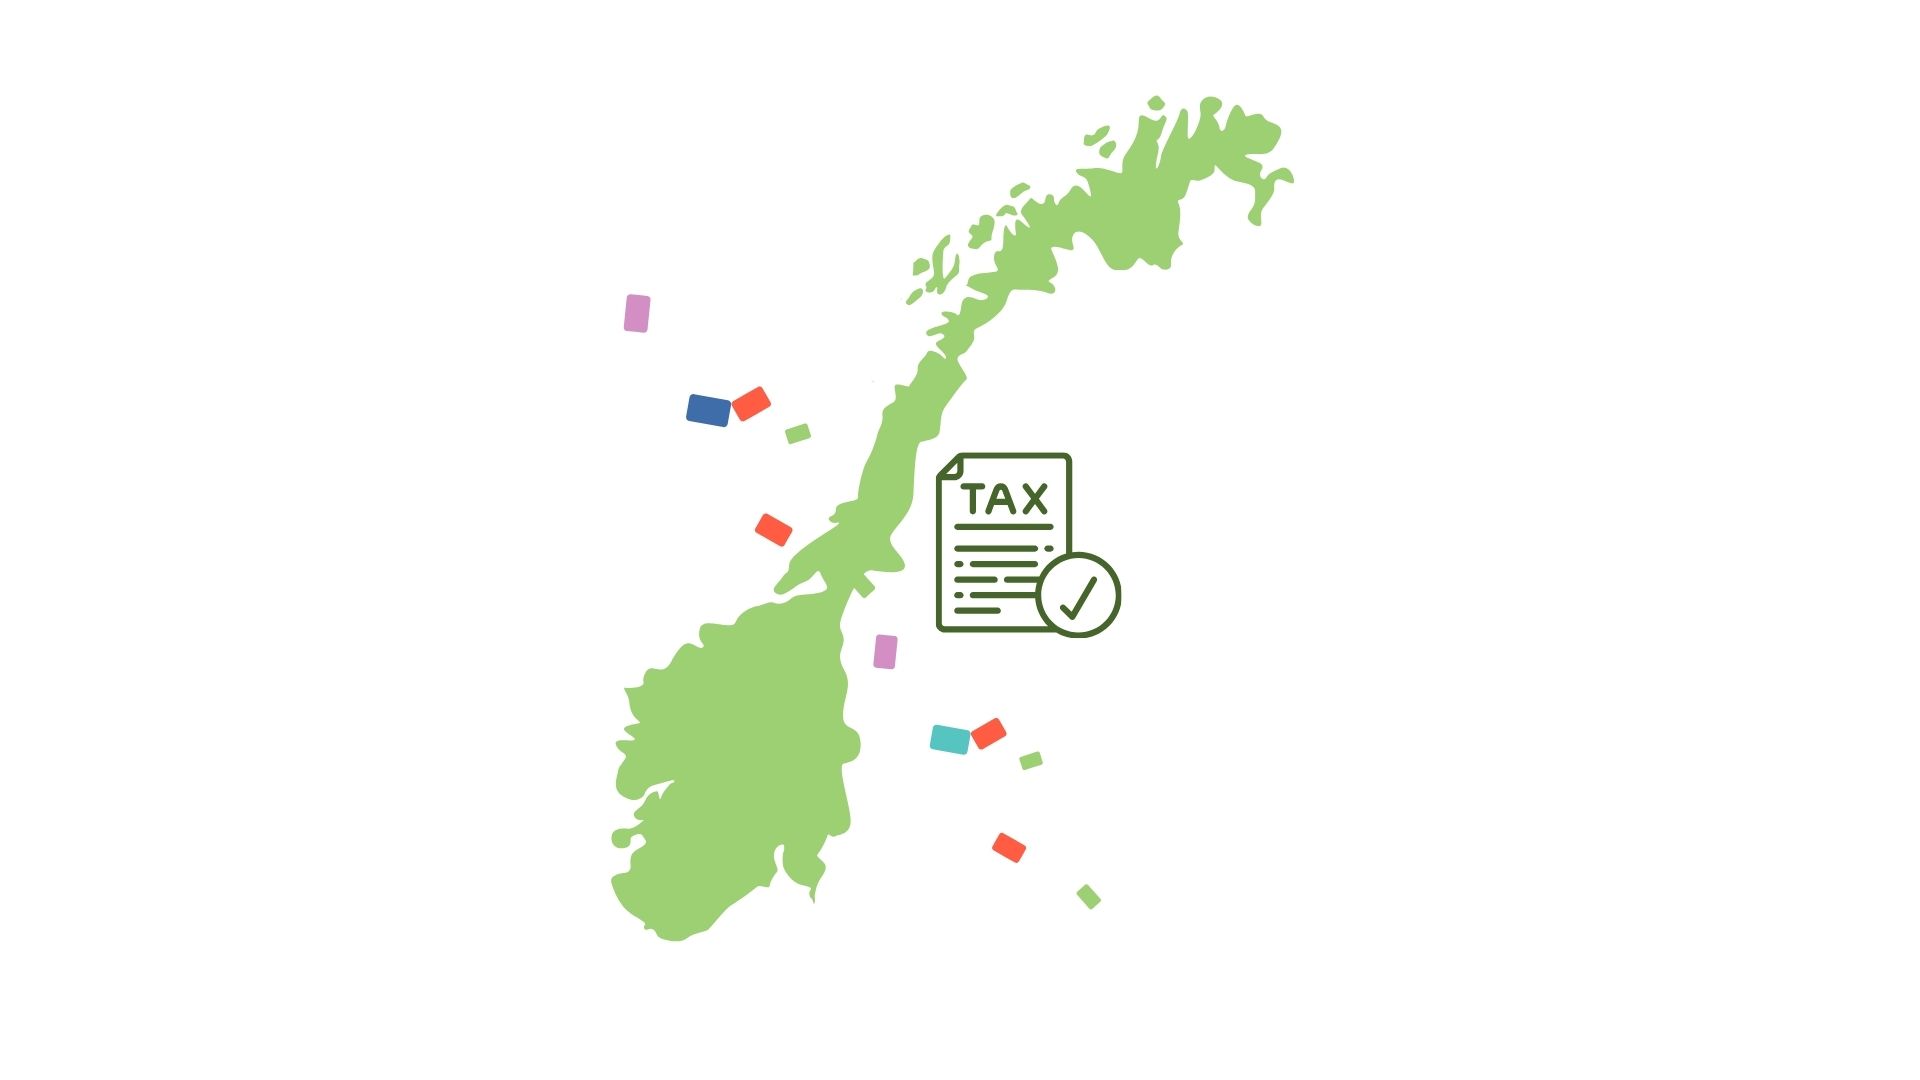 Gift card taxation in Norway